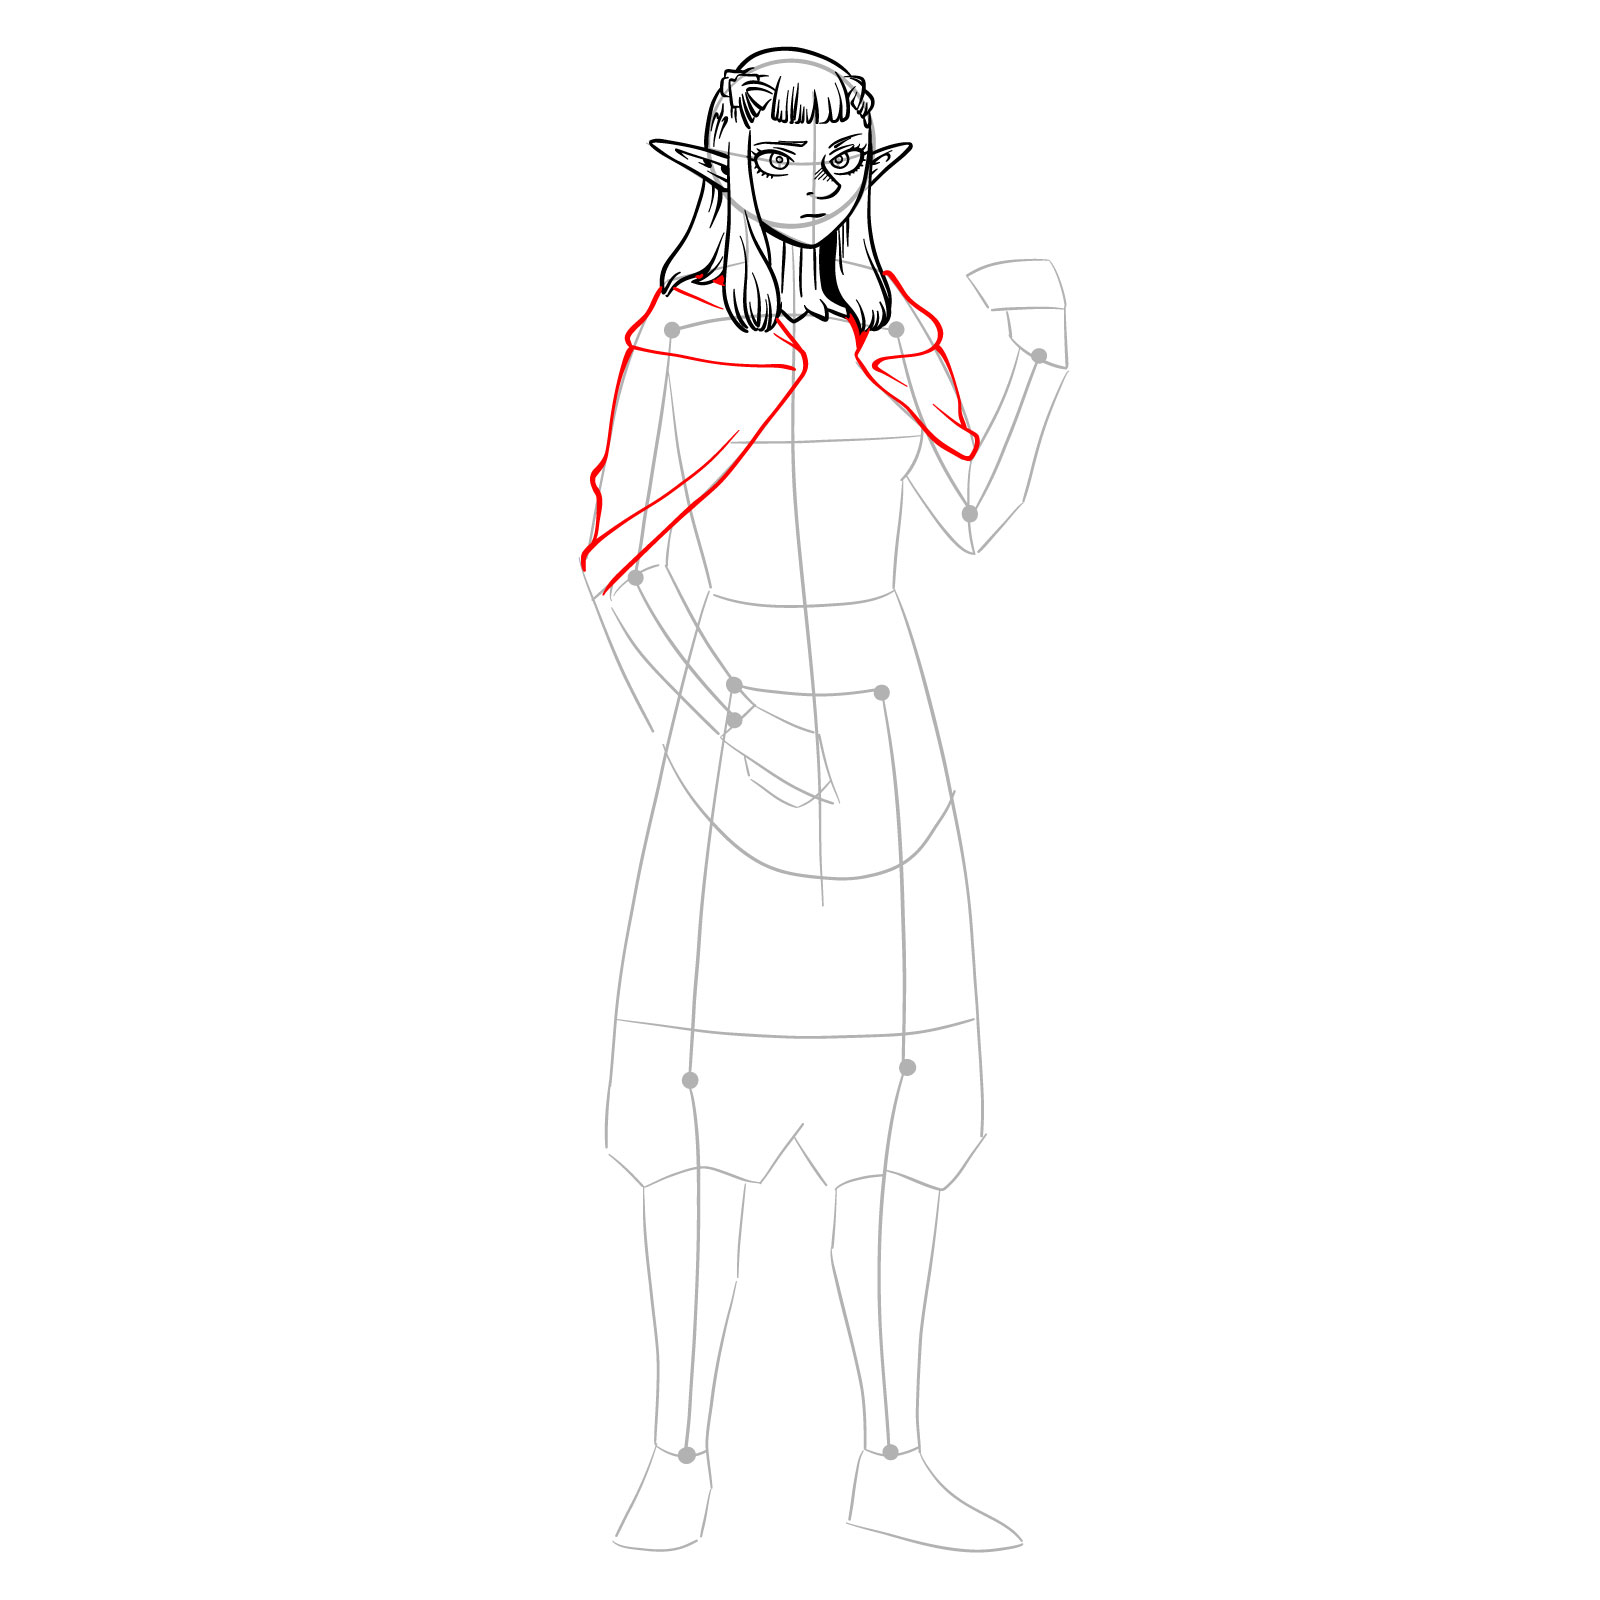 How to draw Pattadol from Delicious in Dungeon - step 11